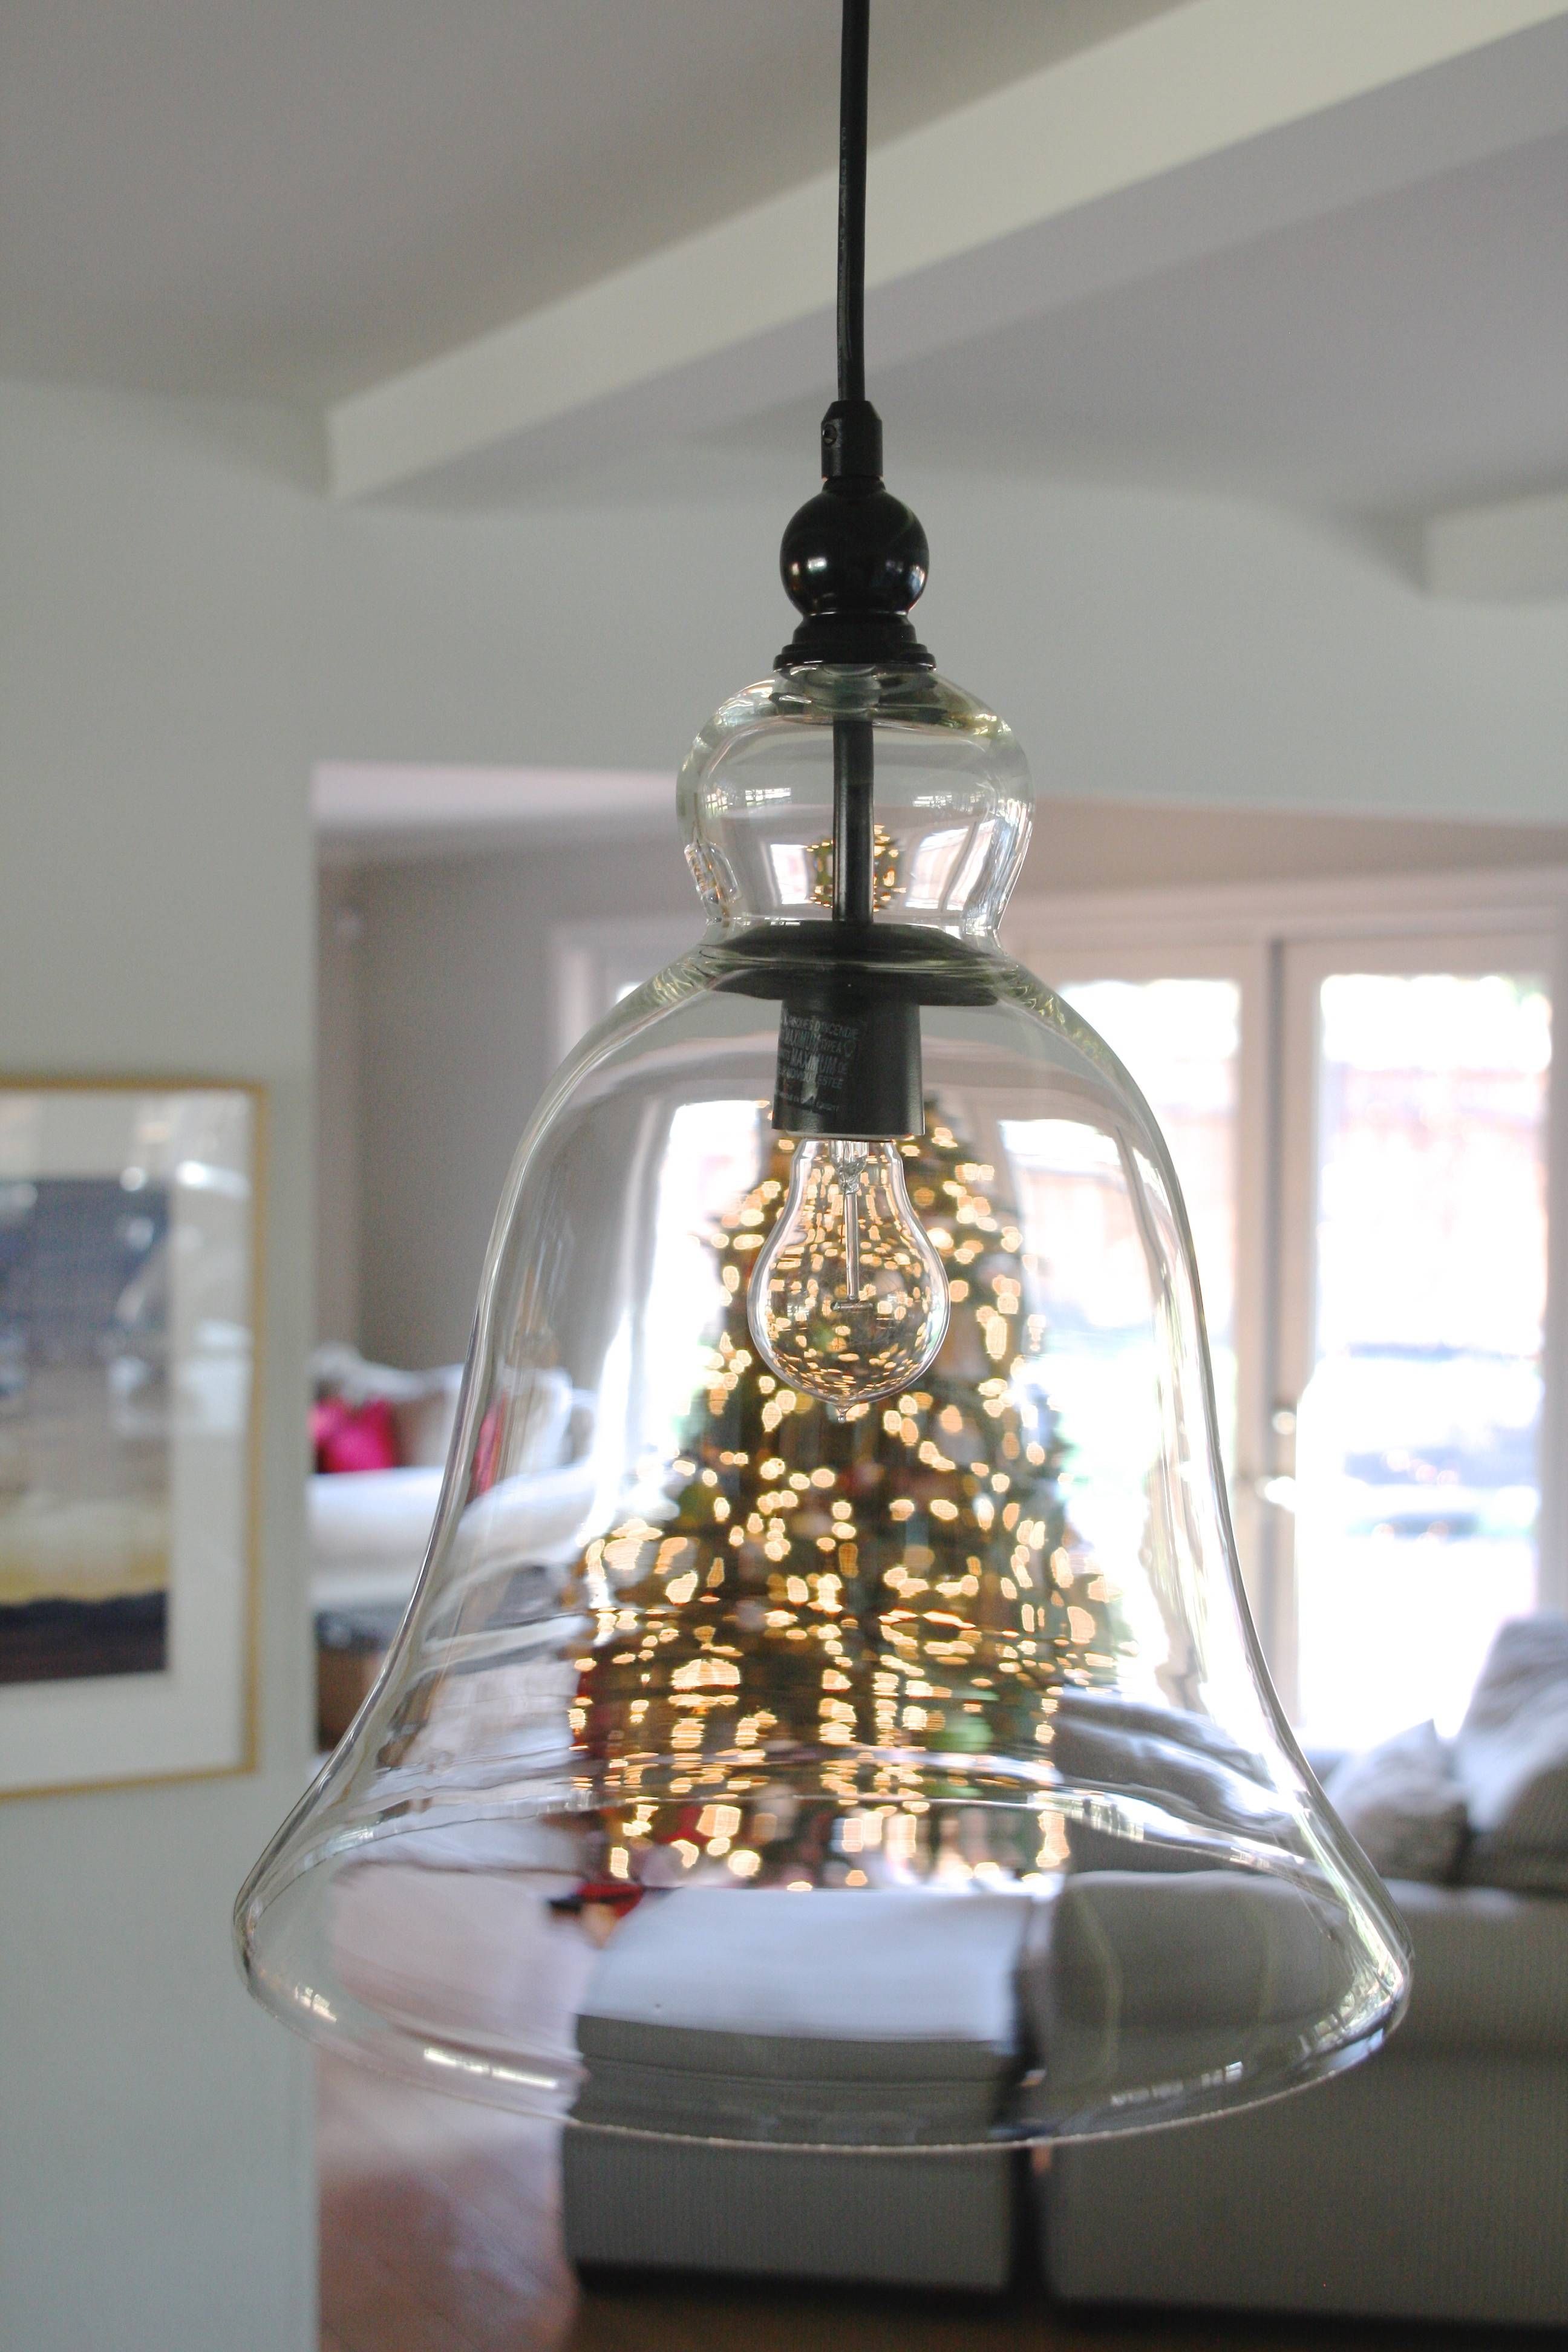 How To Clean Pottery Barn Rustic Pendant Lights – Simply Organized With Regard To Rustic Pendant Lighting (View 10 of 15)